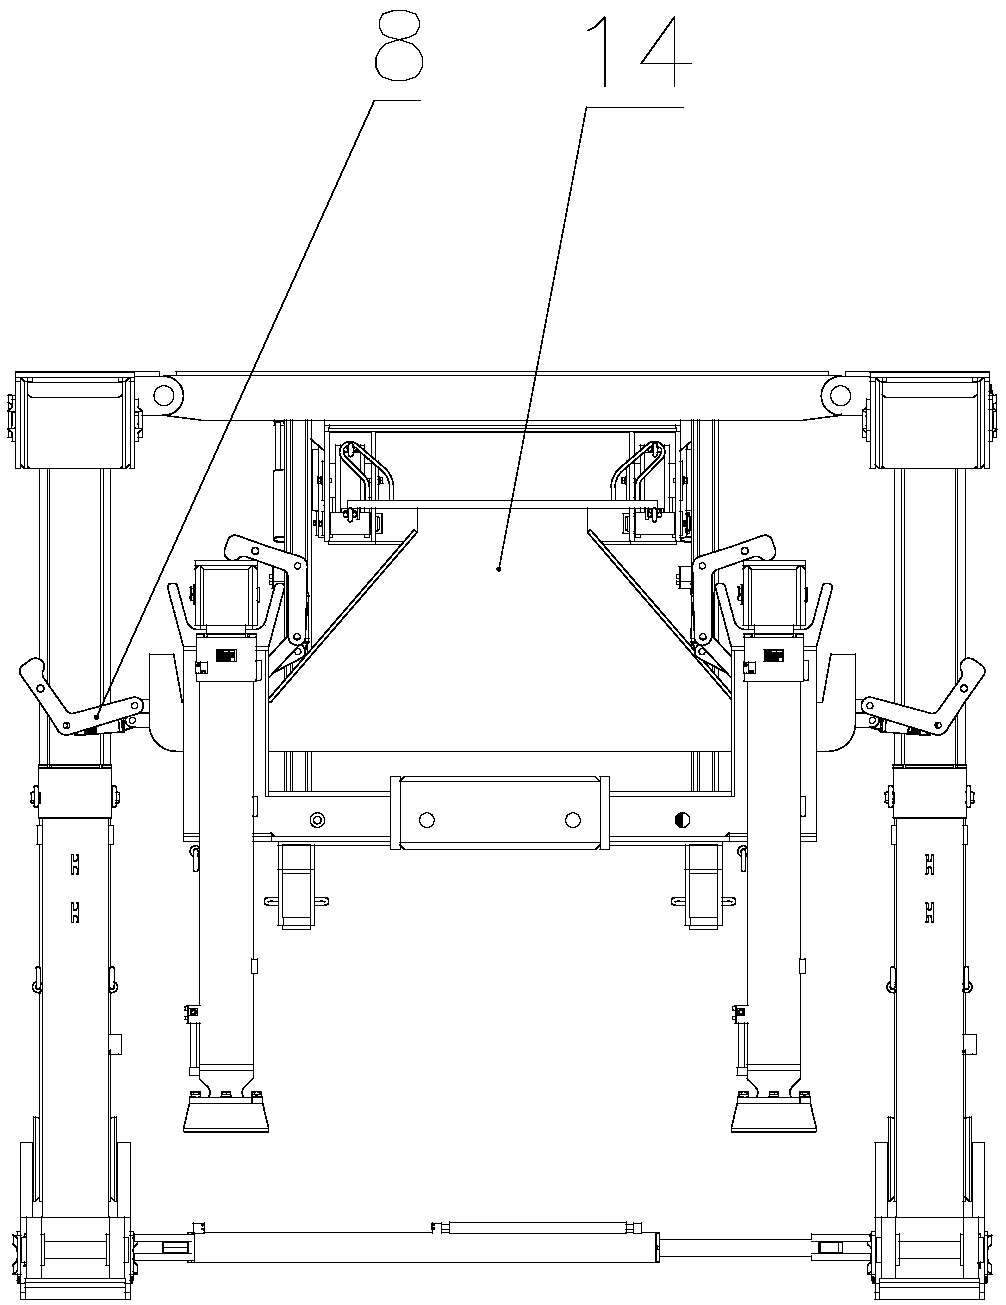 Gob-side entry retaining circulating self-moving type support bracket assembly